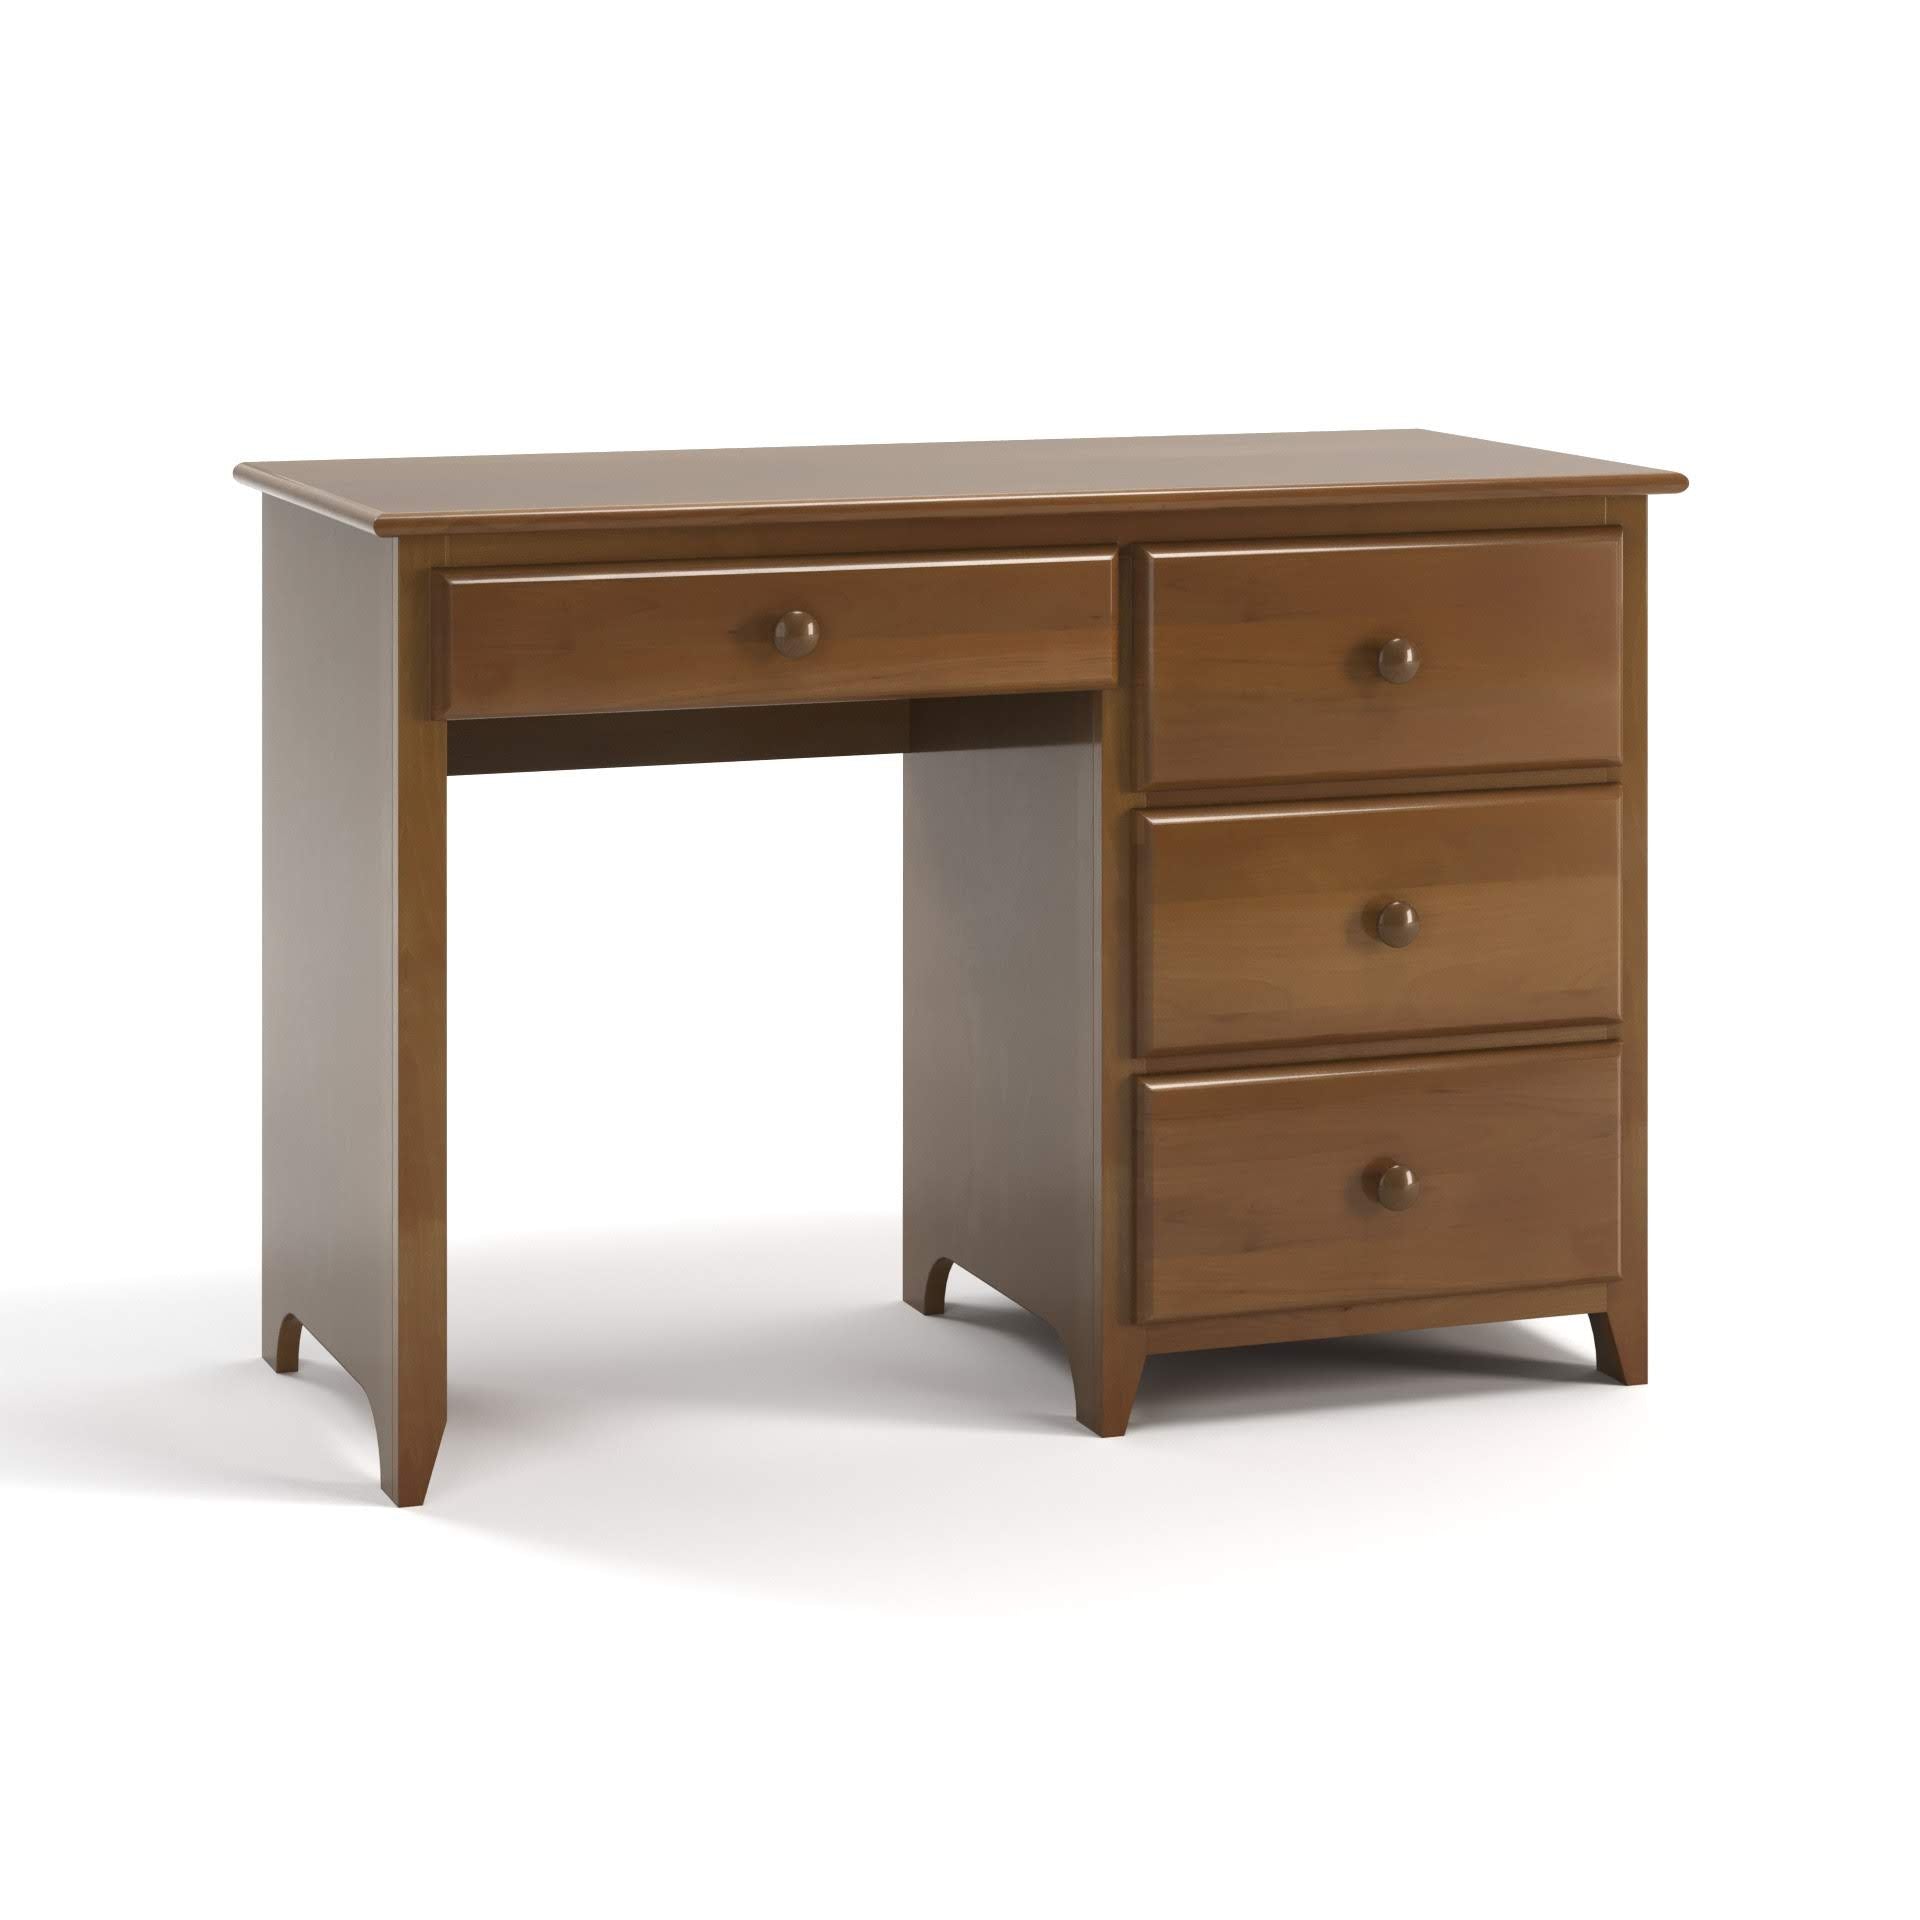 Acadia Shaker Student Desk, with one wide drawer and three drawers on the side. Pictured in Walnut Finish from a side angle.